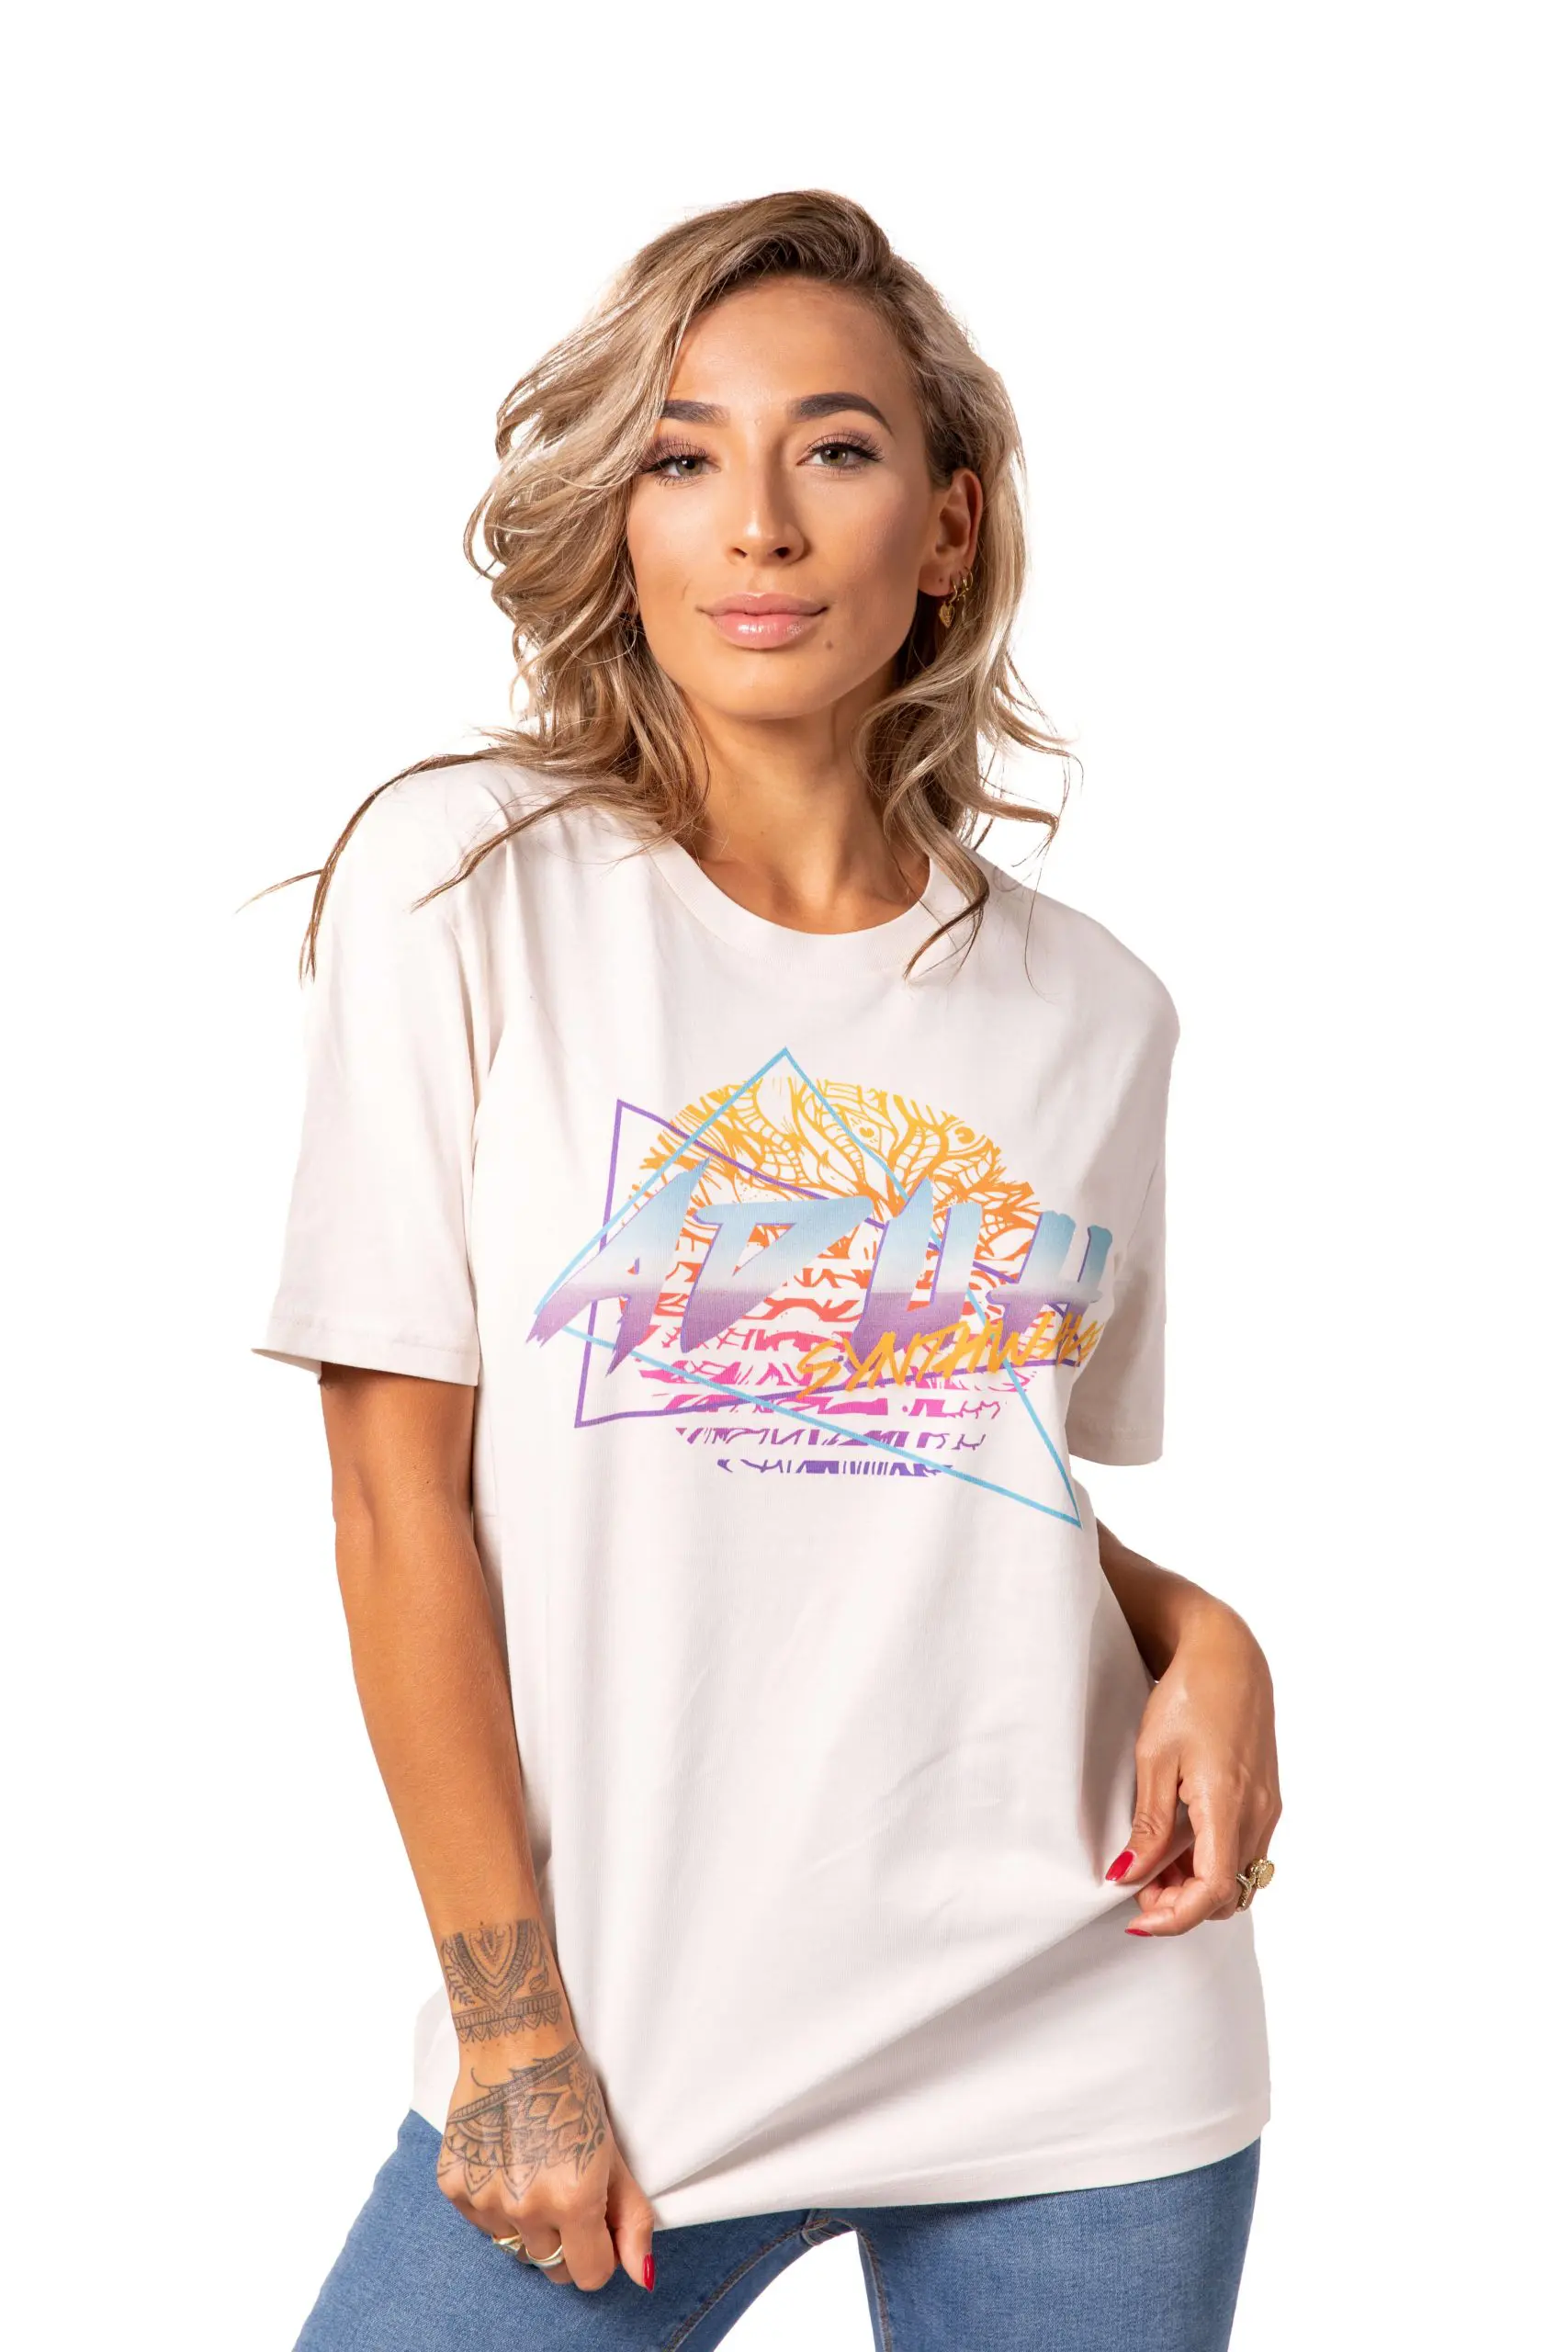 T-Shirt Synthwave White 2